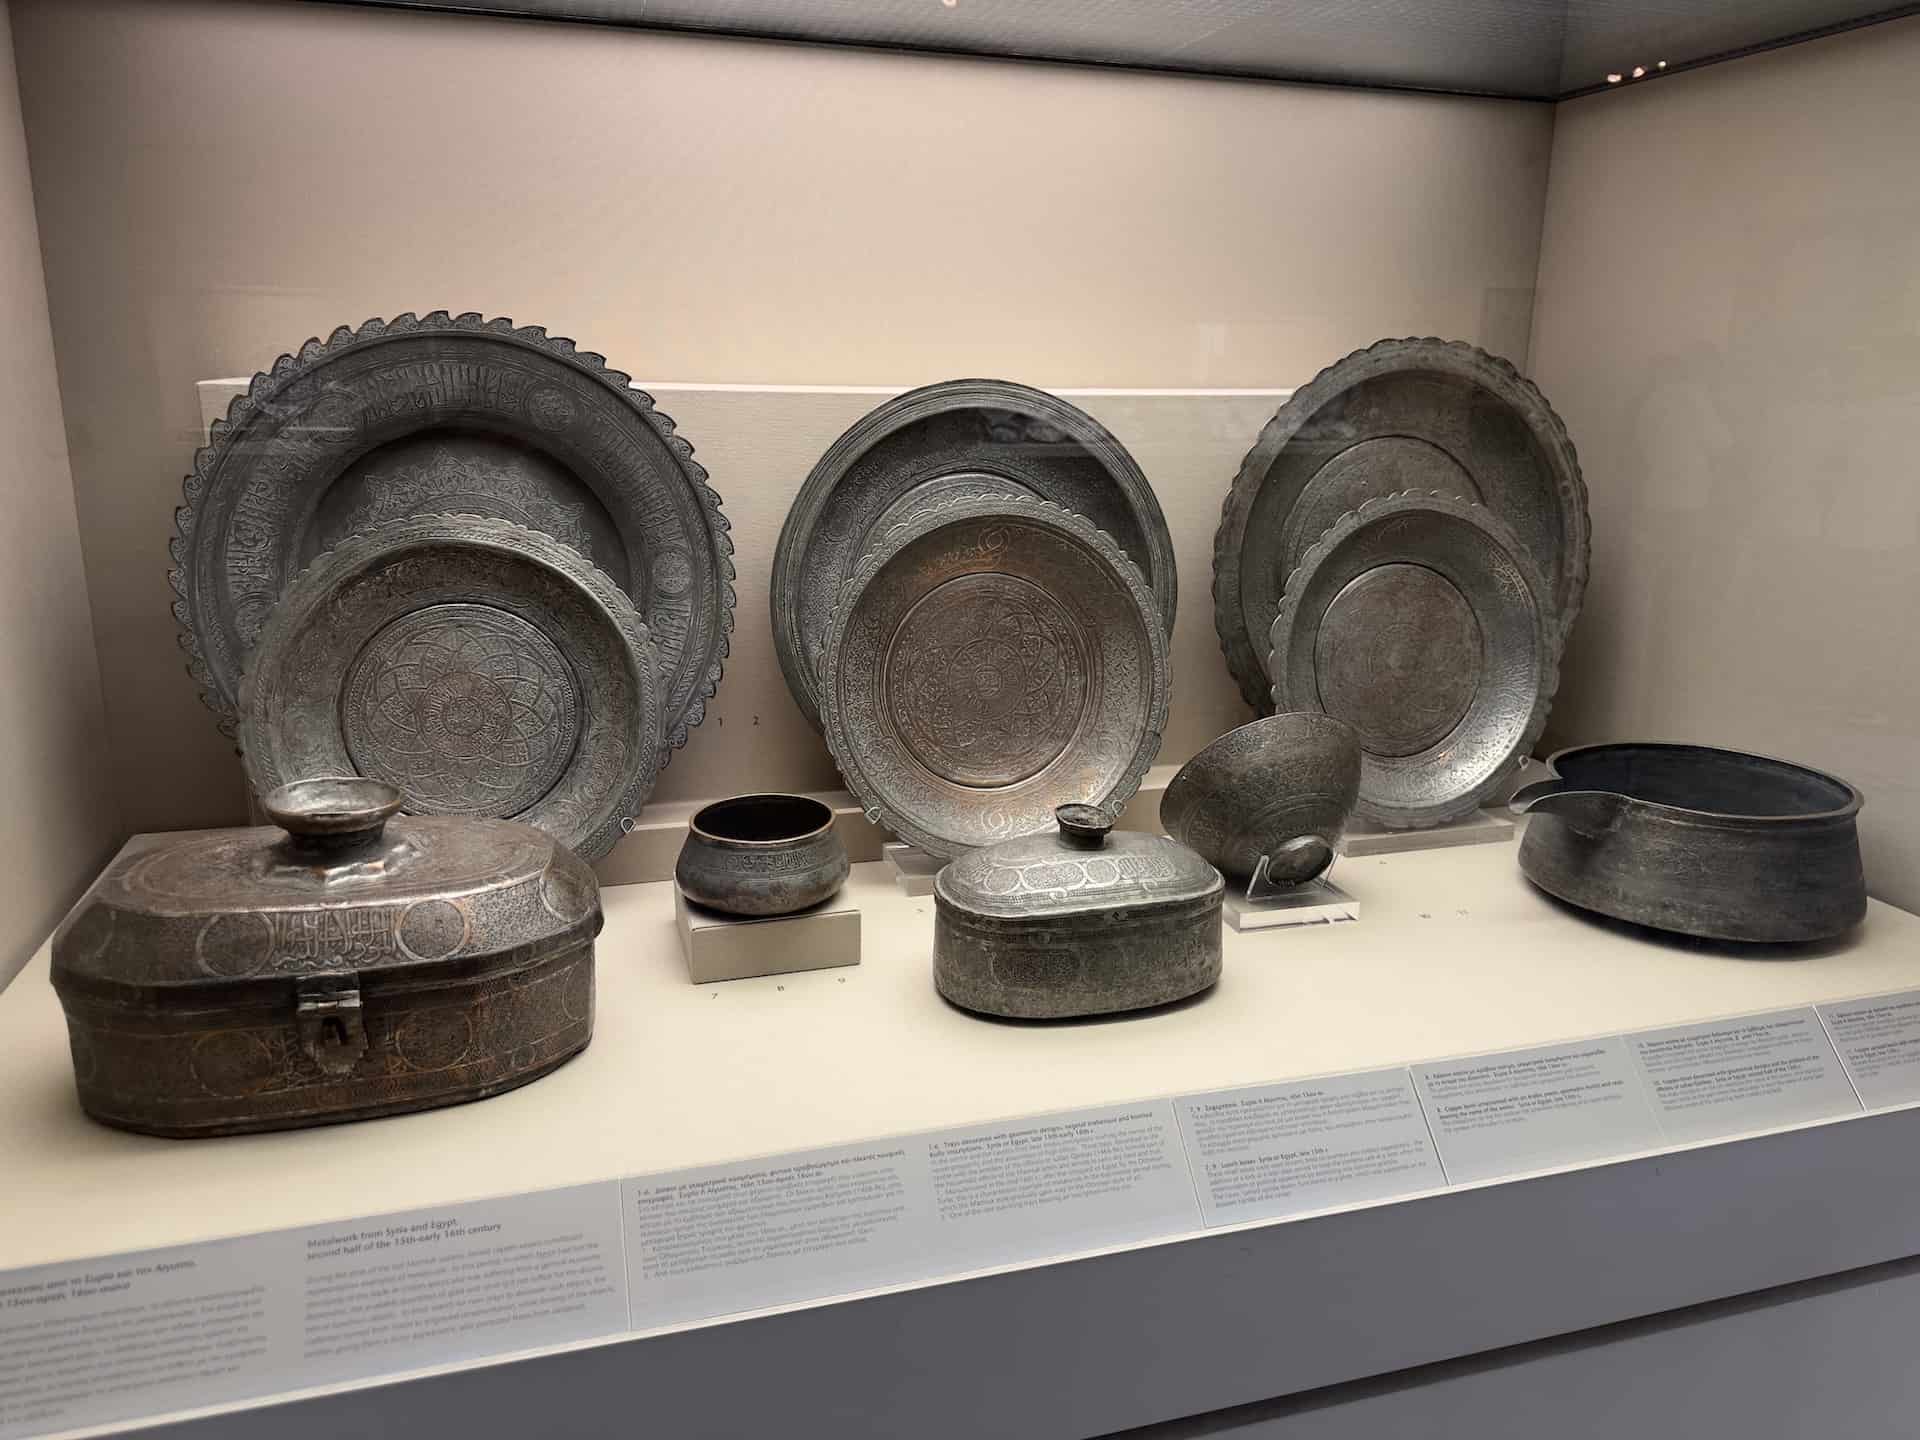 Metalwork from Syria and Egypt; second half of the 15th-early 16th century at the Benaki Museum of Islamic Art in Athens, Greece